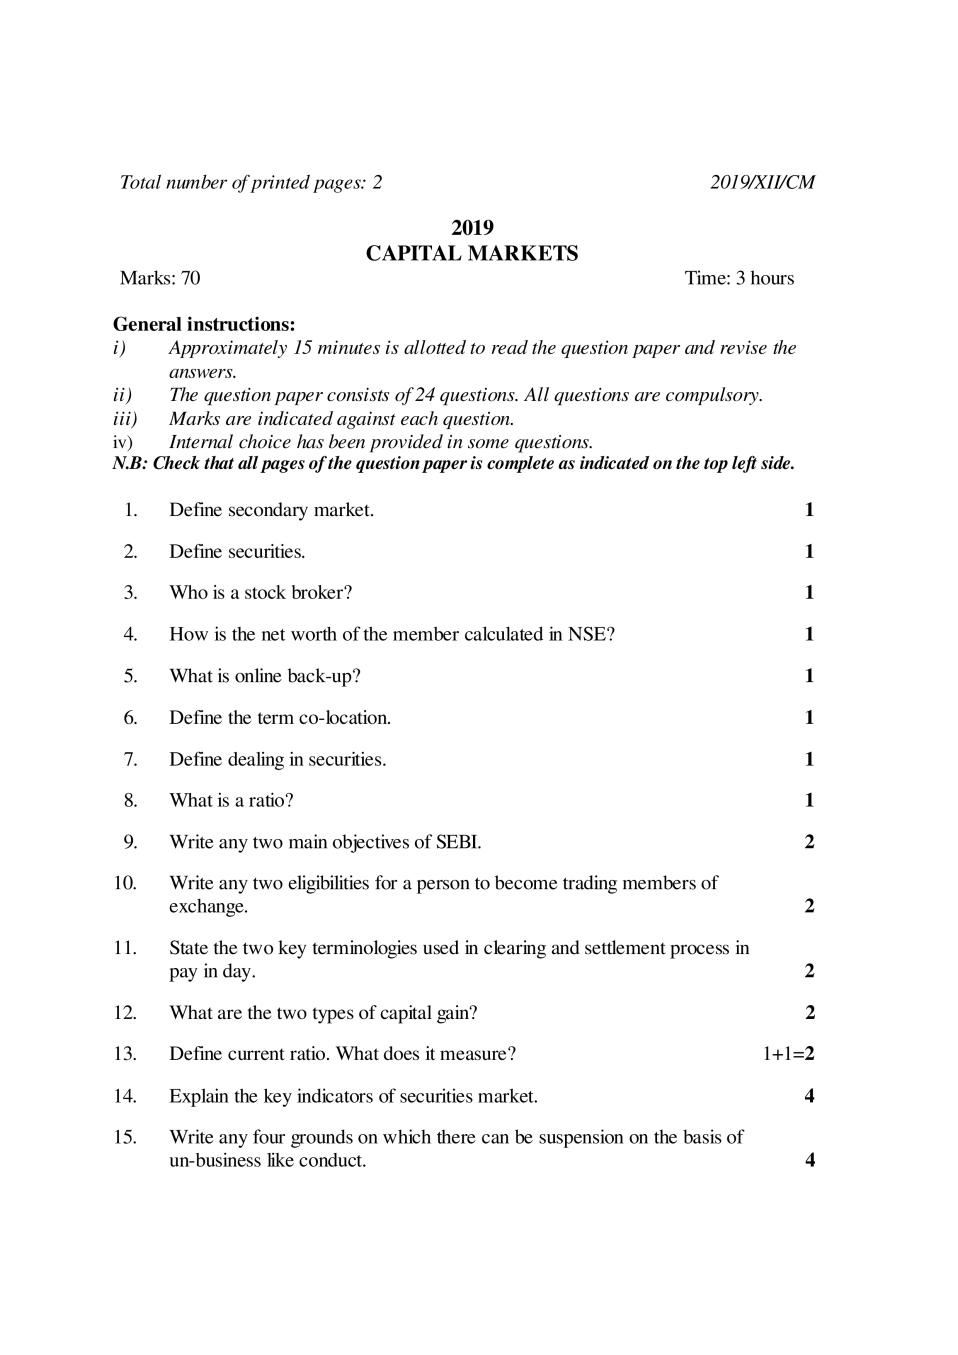 NBSE Class 12 Question Paper 2019 for Capital Markets - Page 1